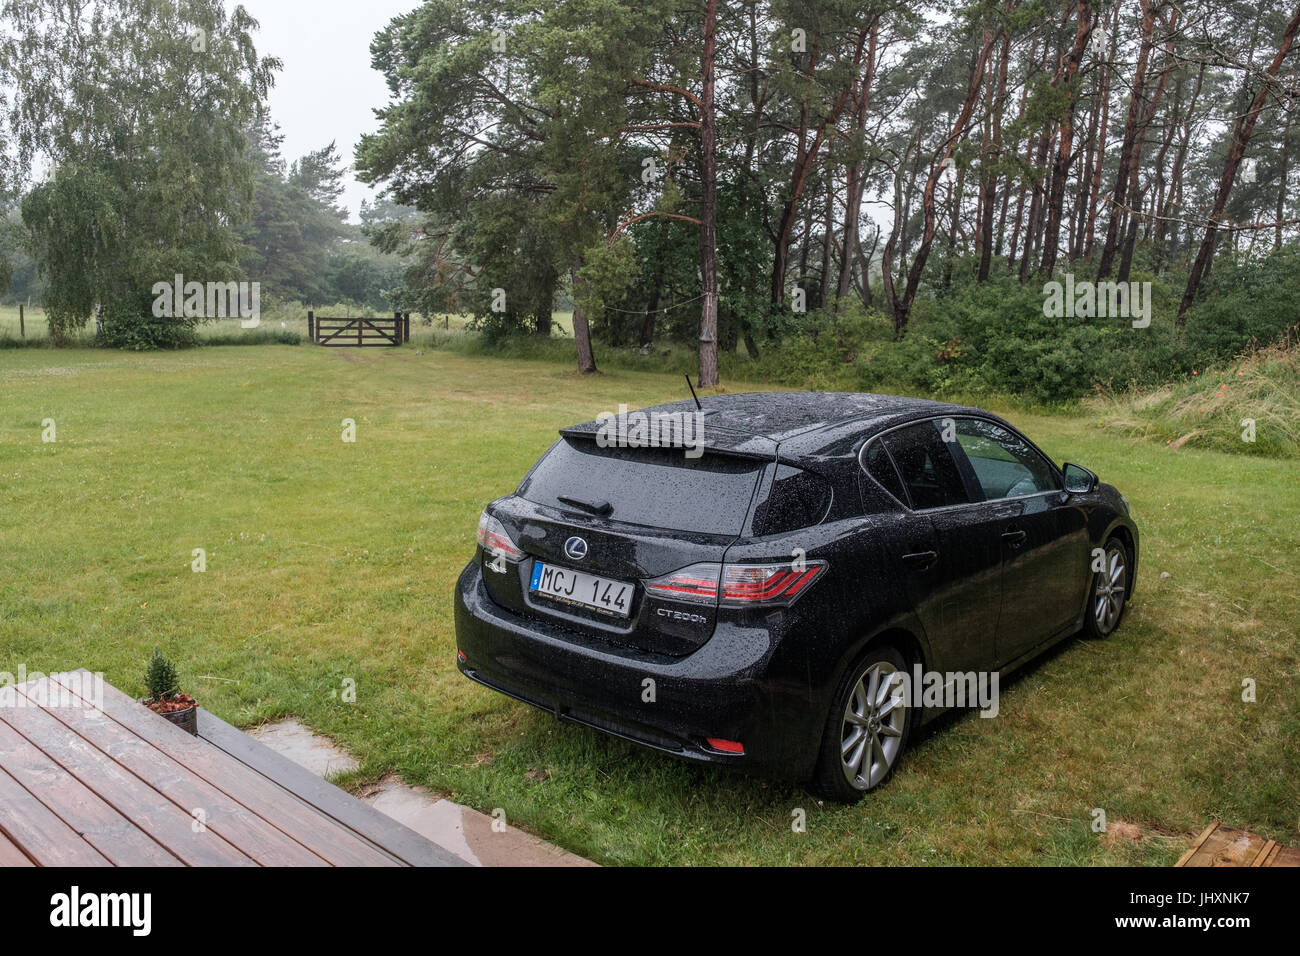 Rainy summer day in the countryside of Swedish Baltic sea island Öland. Öland is a popular tourist destination in Sweden during summertime. Stock Photo